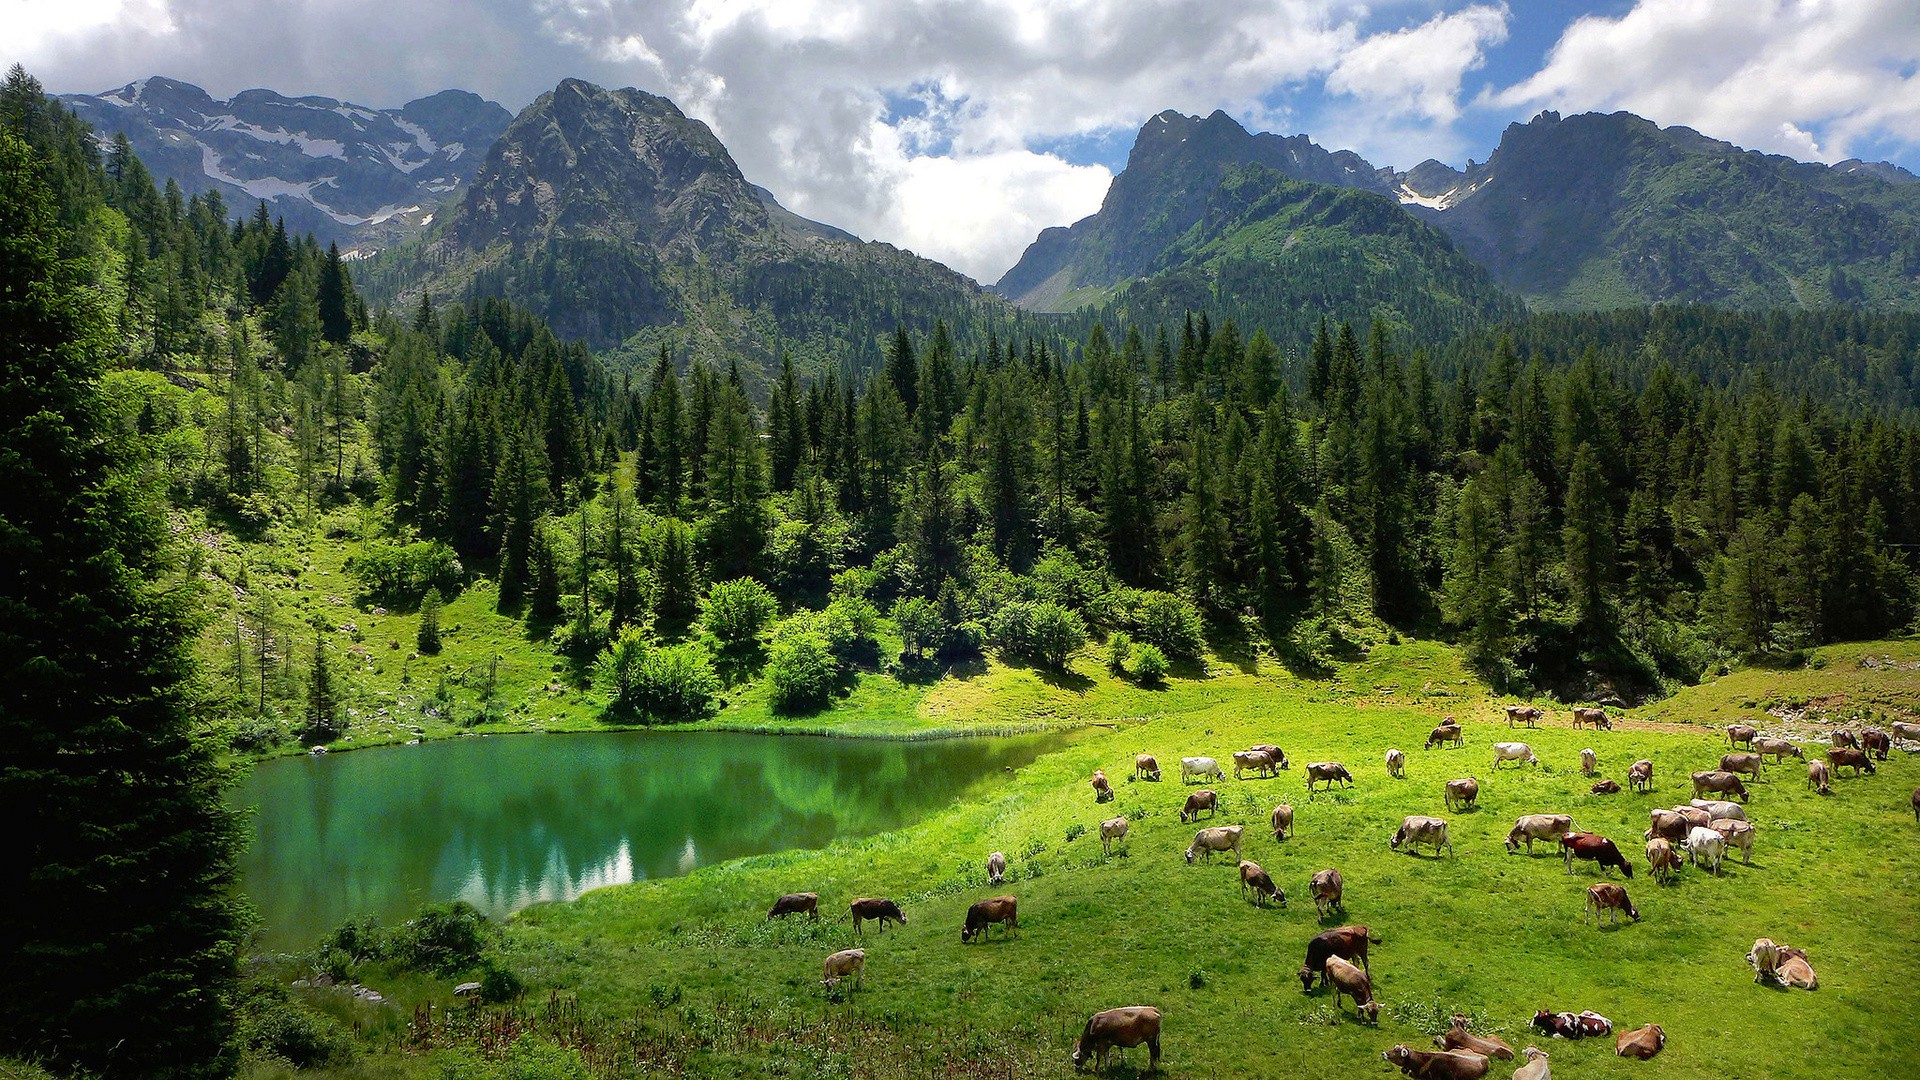 General 1920x1080 nature landscape trees forest Alps Italy water lake animals pine trees mountains clouds grass reflection field